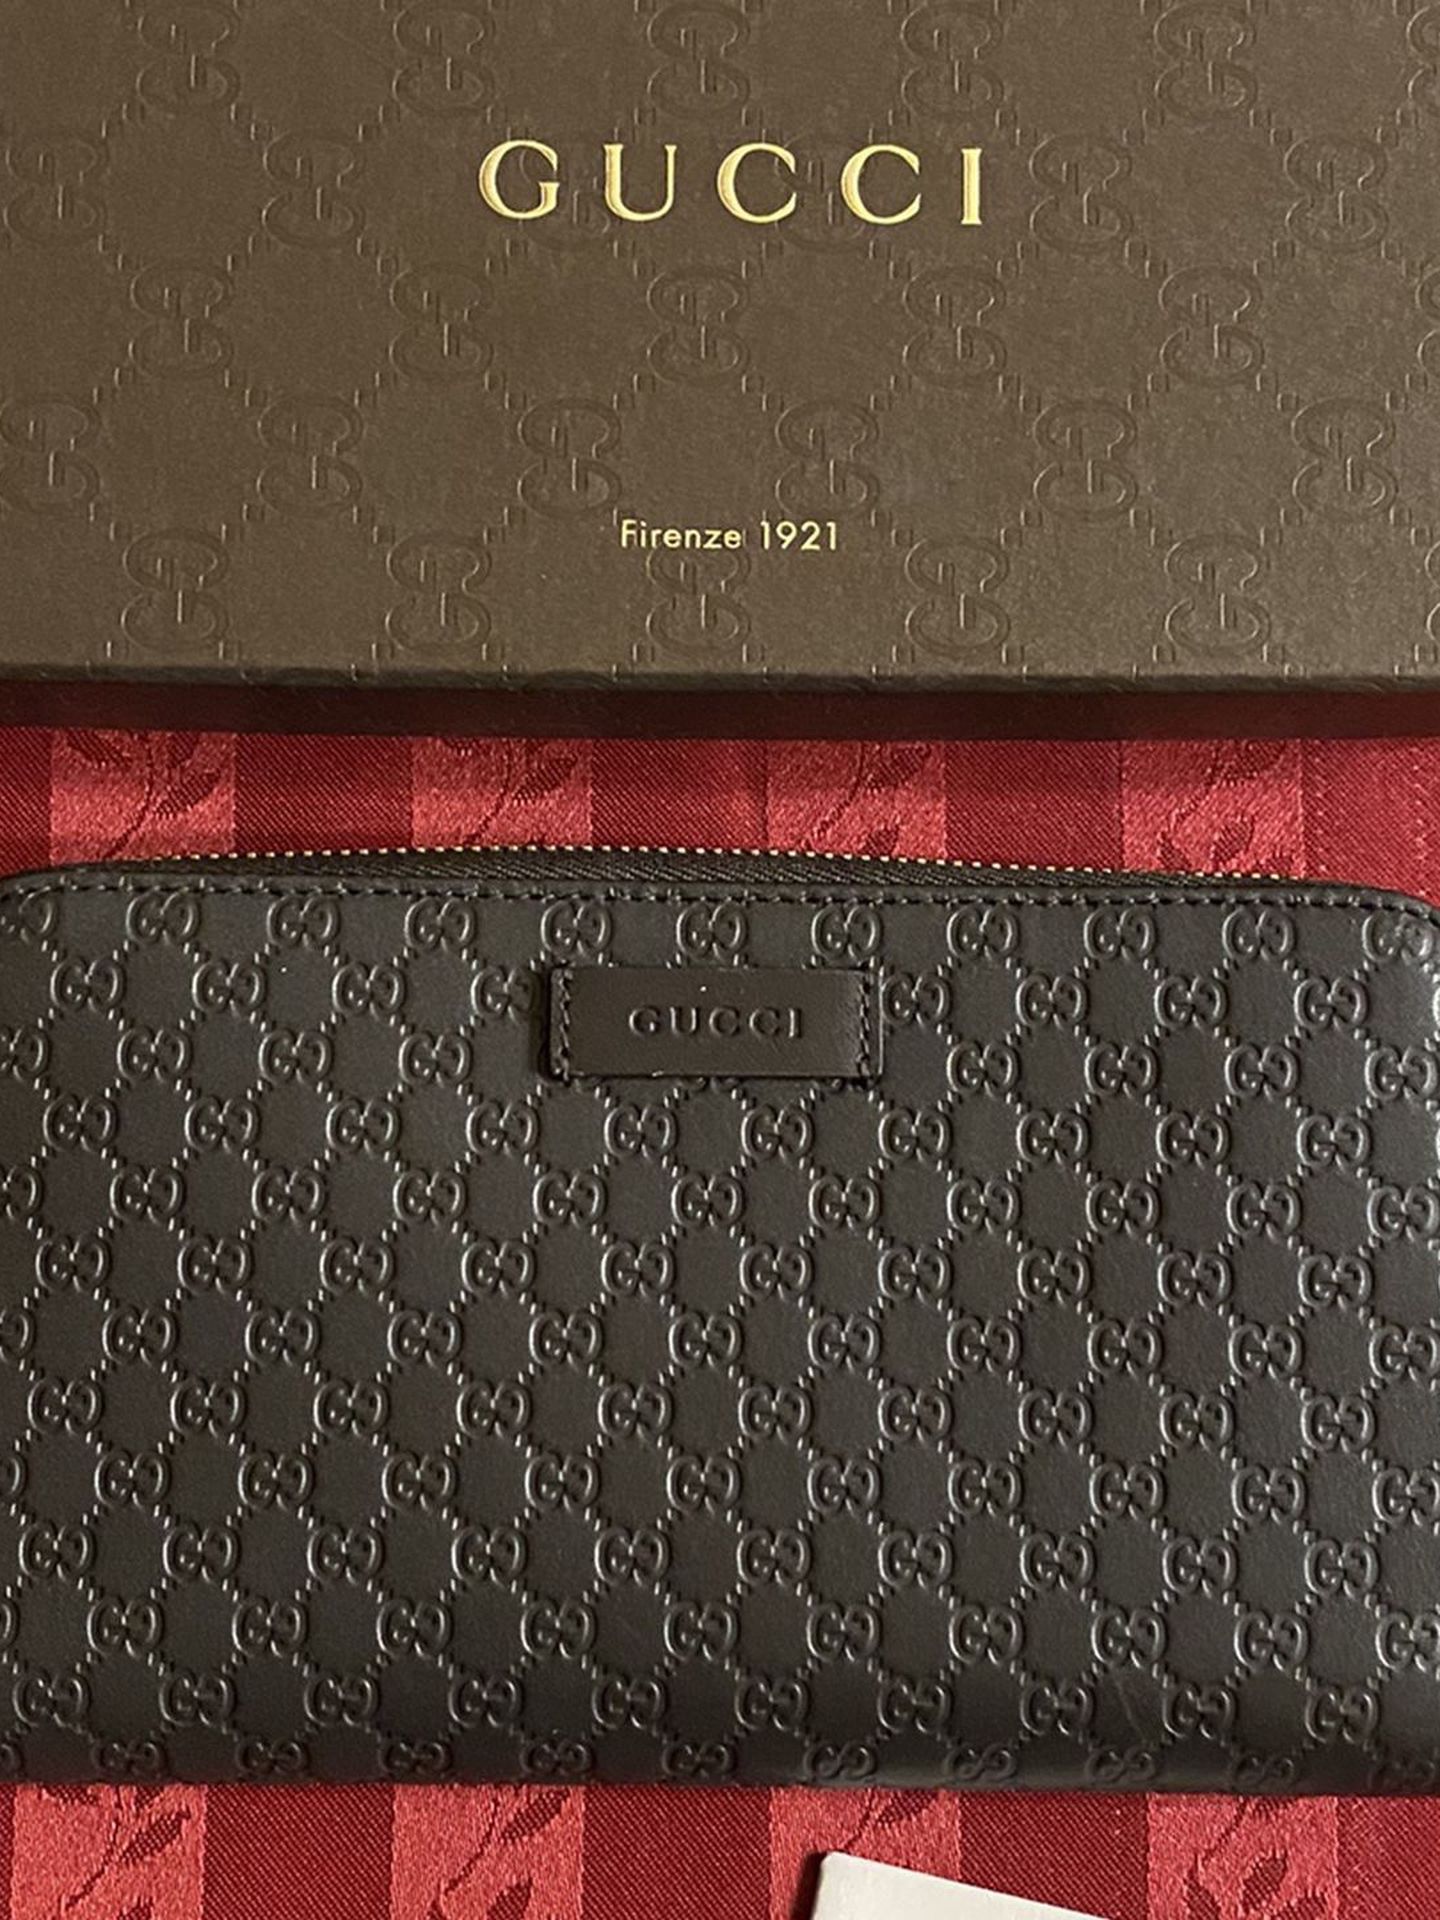 Gucci Traveler’s Wallet - Authentic